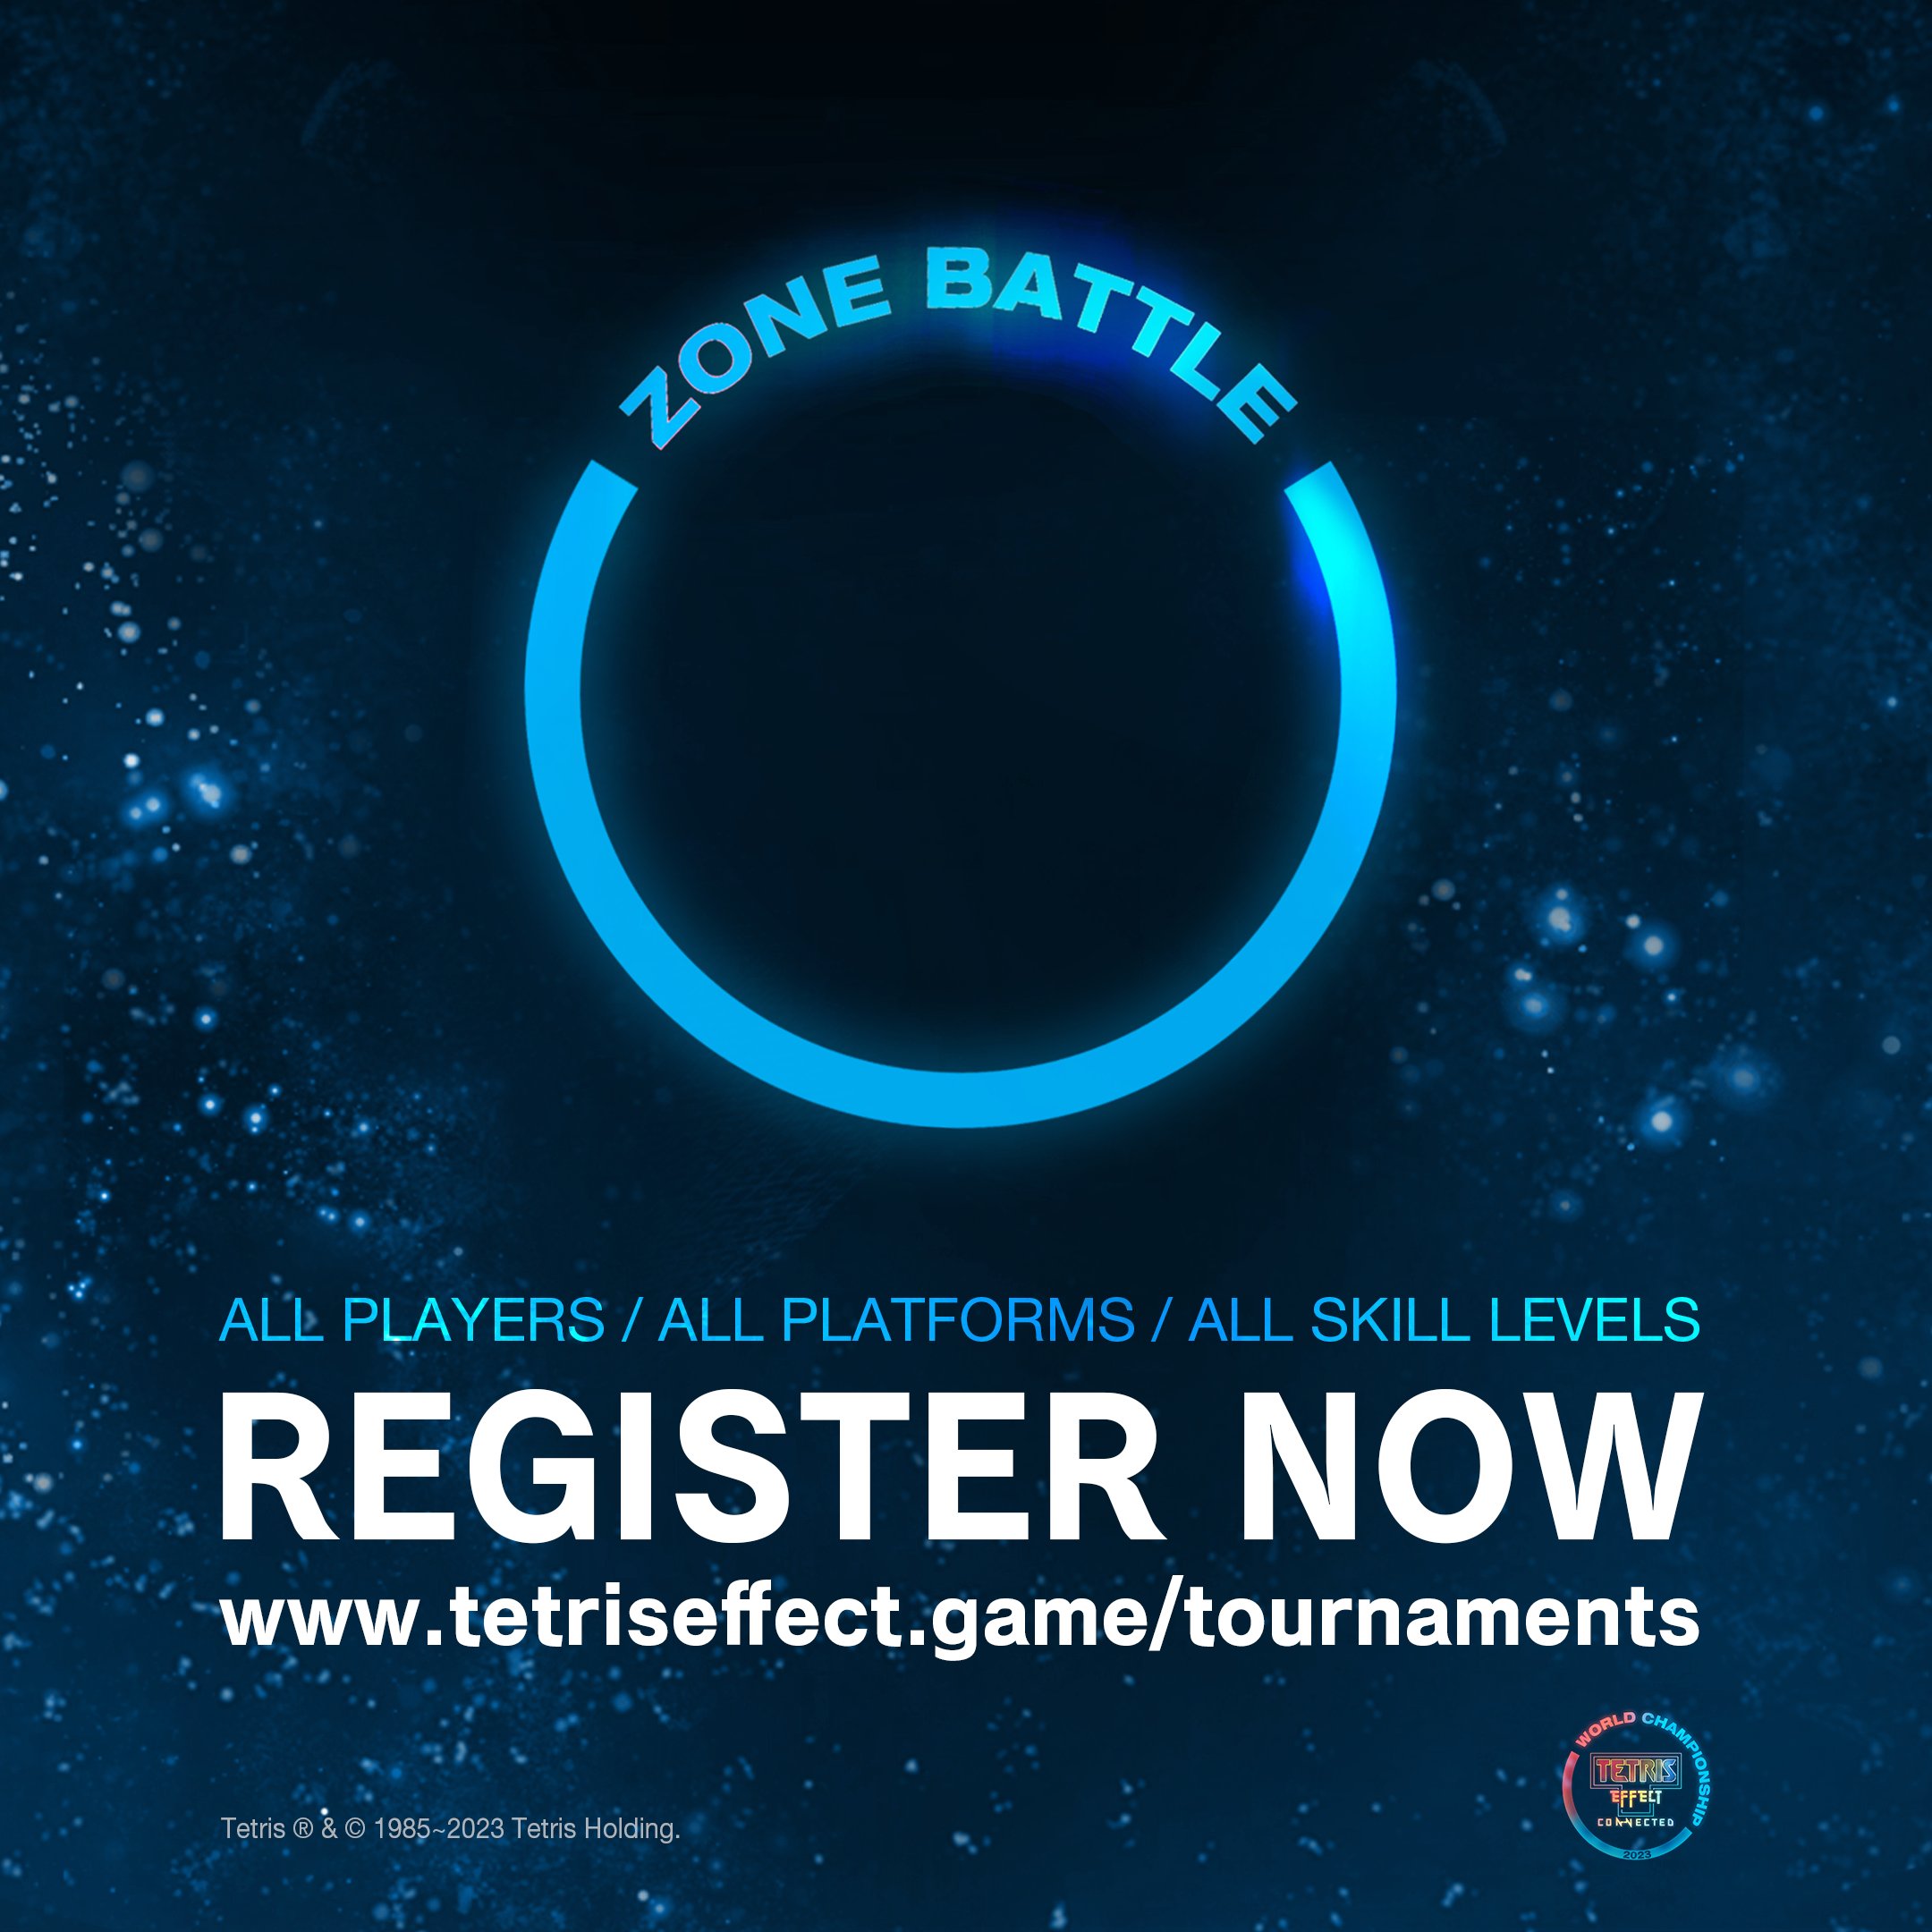 Enhance on X: The TECWC 2023 ZONE BATTLE event is happening this weekend!  ⏰ Deadline: Register for a time slot (or both) by Nov. 4 at   Registration closes two hours before